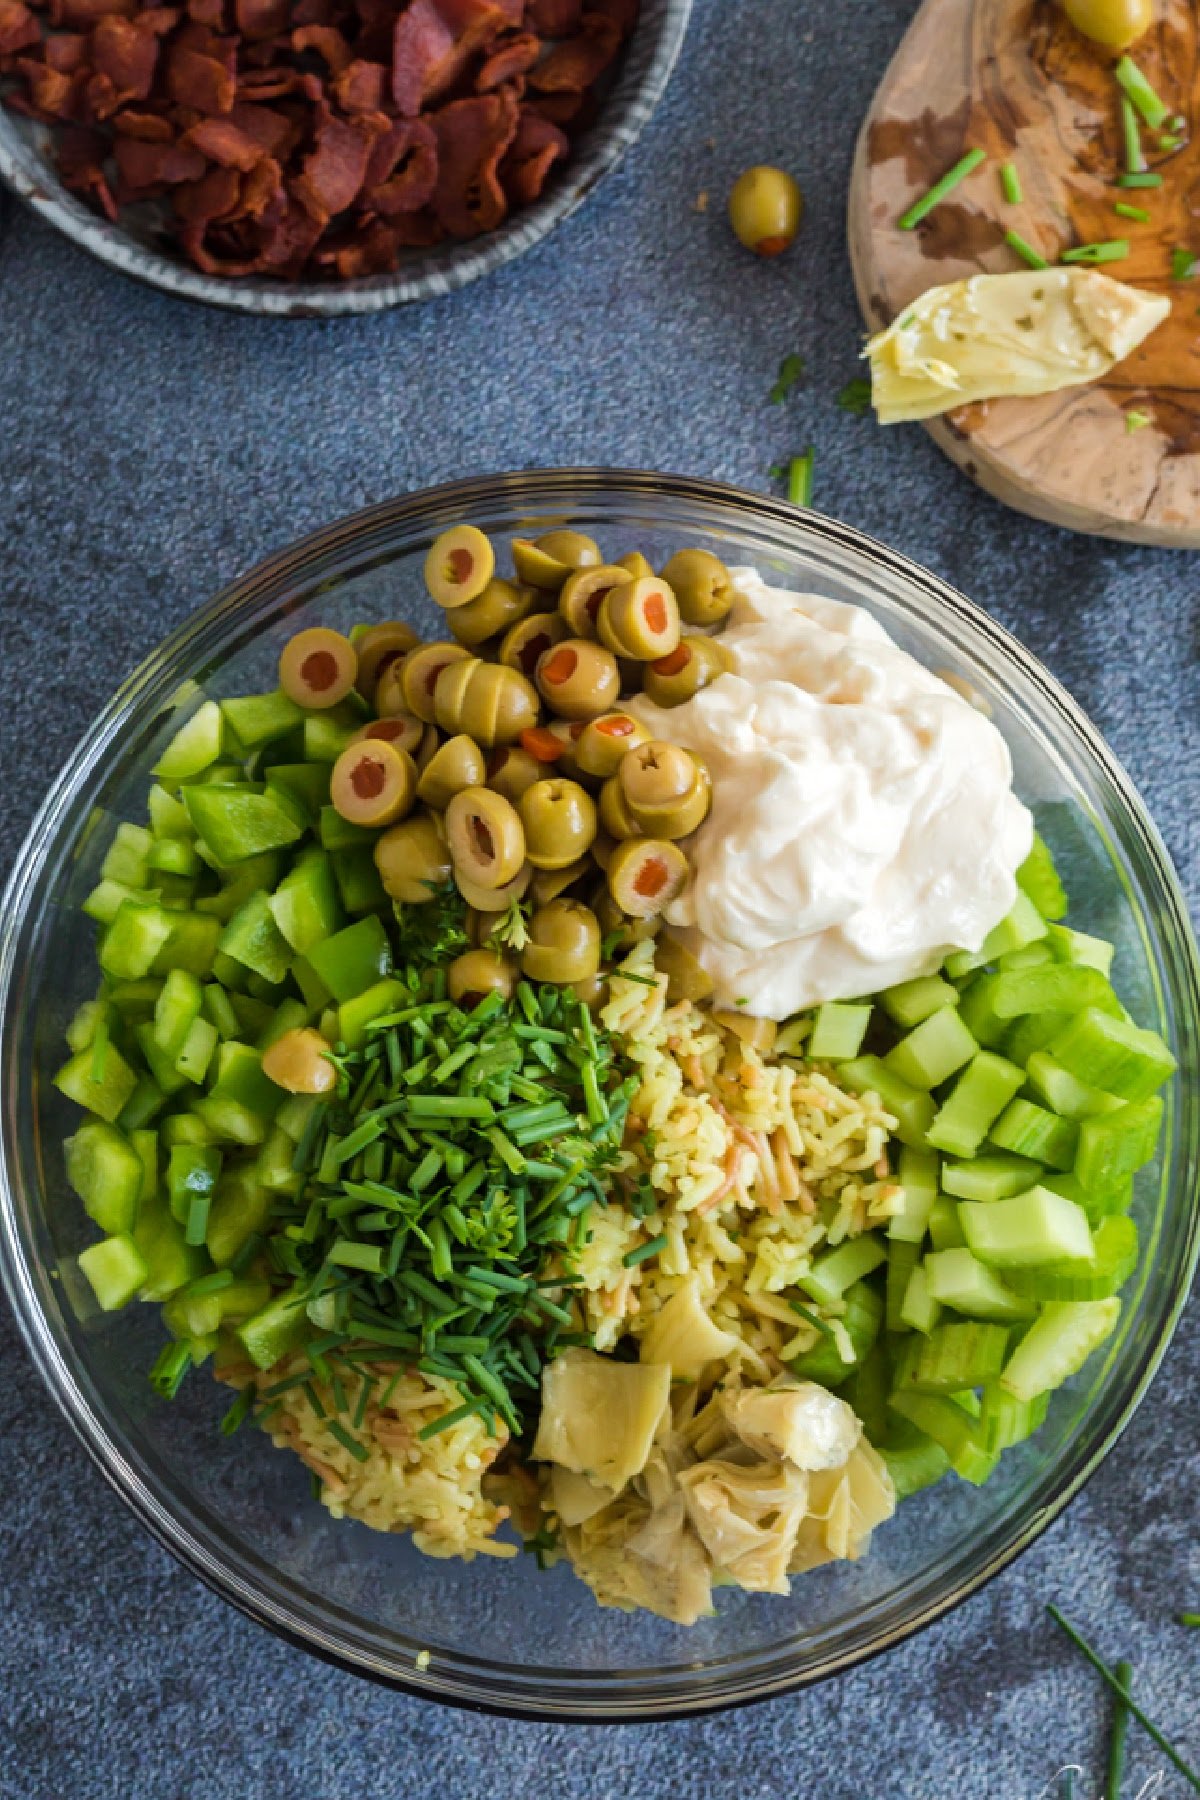 Glass bowl with piles of artichoke rice salad mixins mounded on top: mayo, celery, olives, bell pepper, artichoke hearts, and chives.